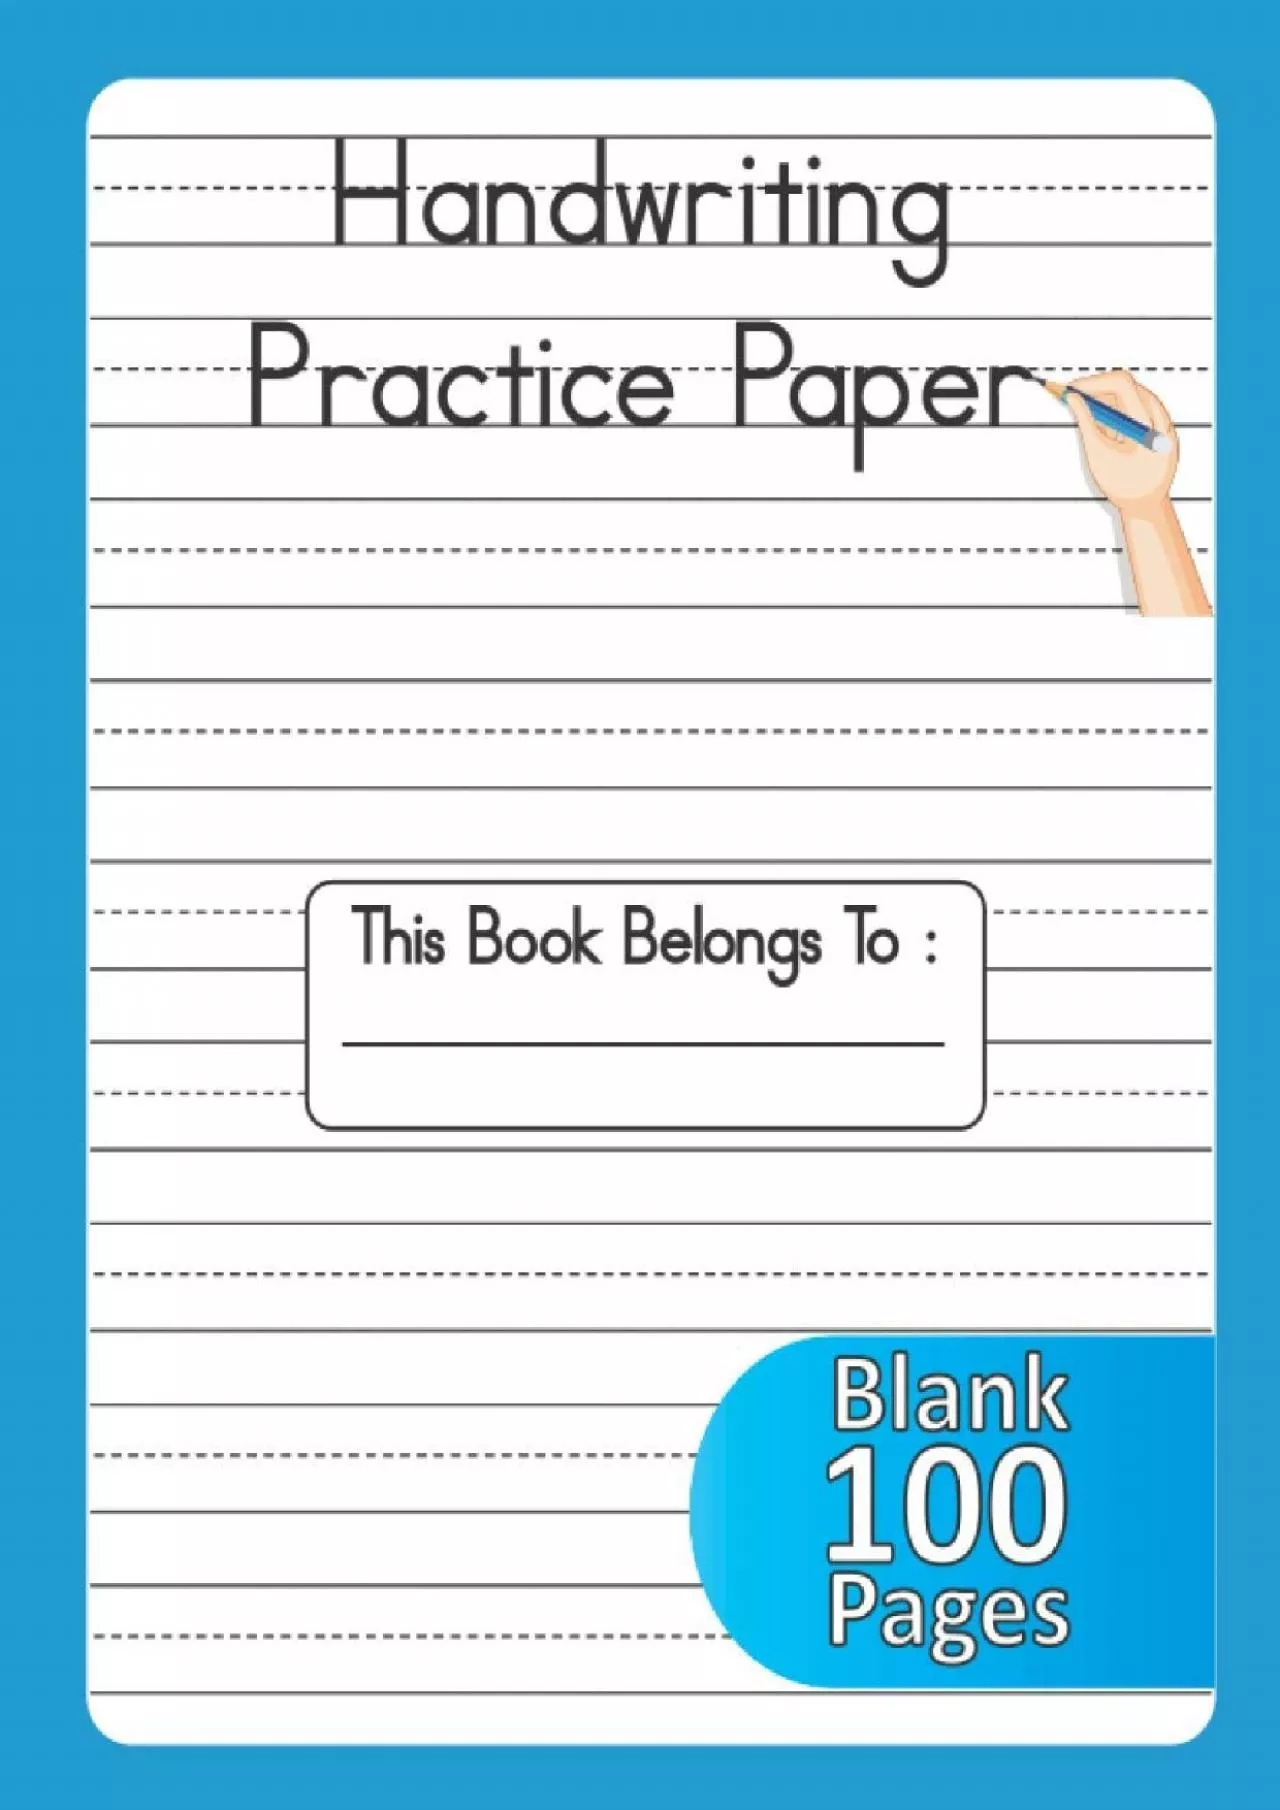 Handwriting Practice Paper: 100 Blank Writing Pages Handwriting Practice Paper with Dotted